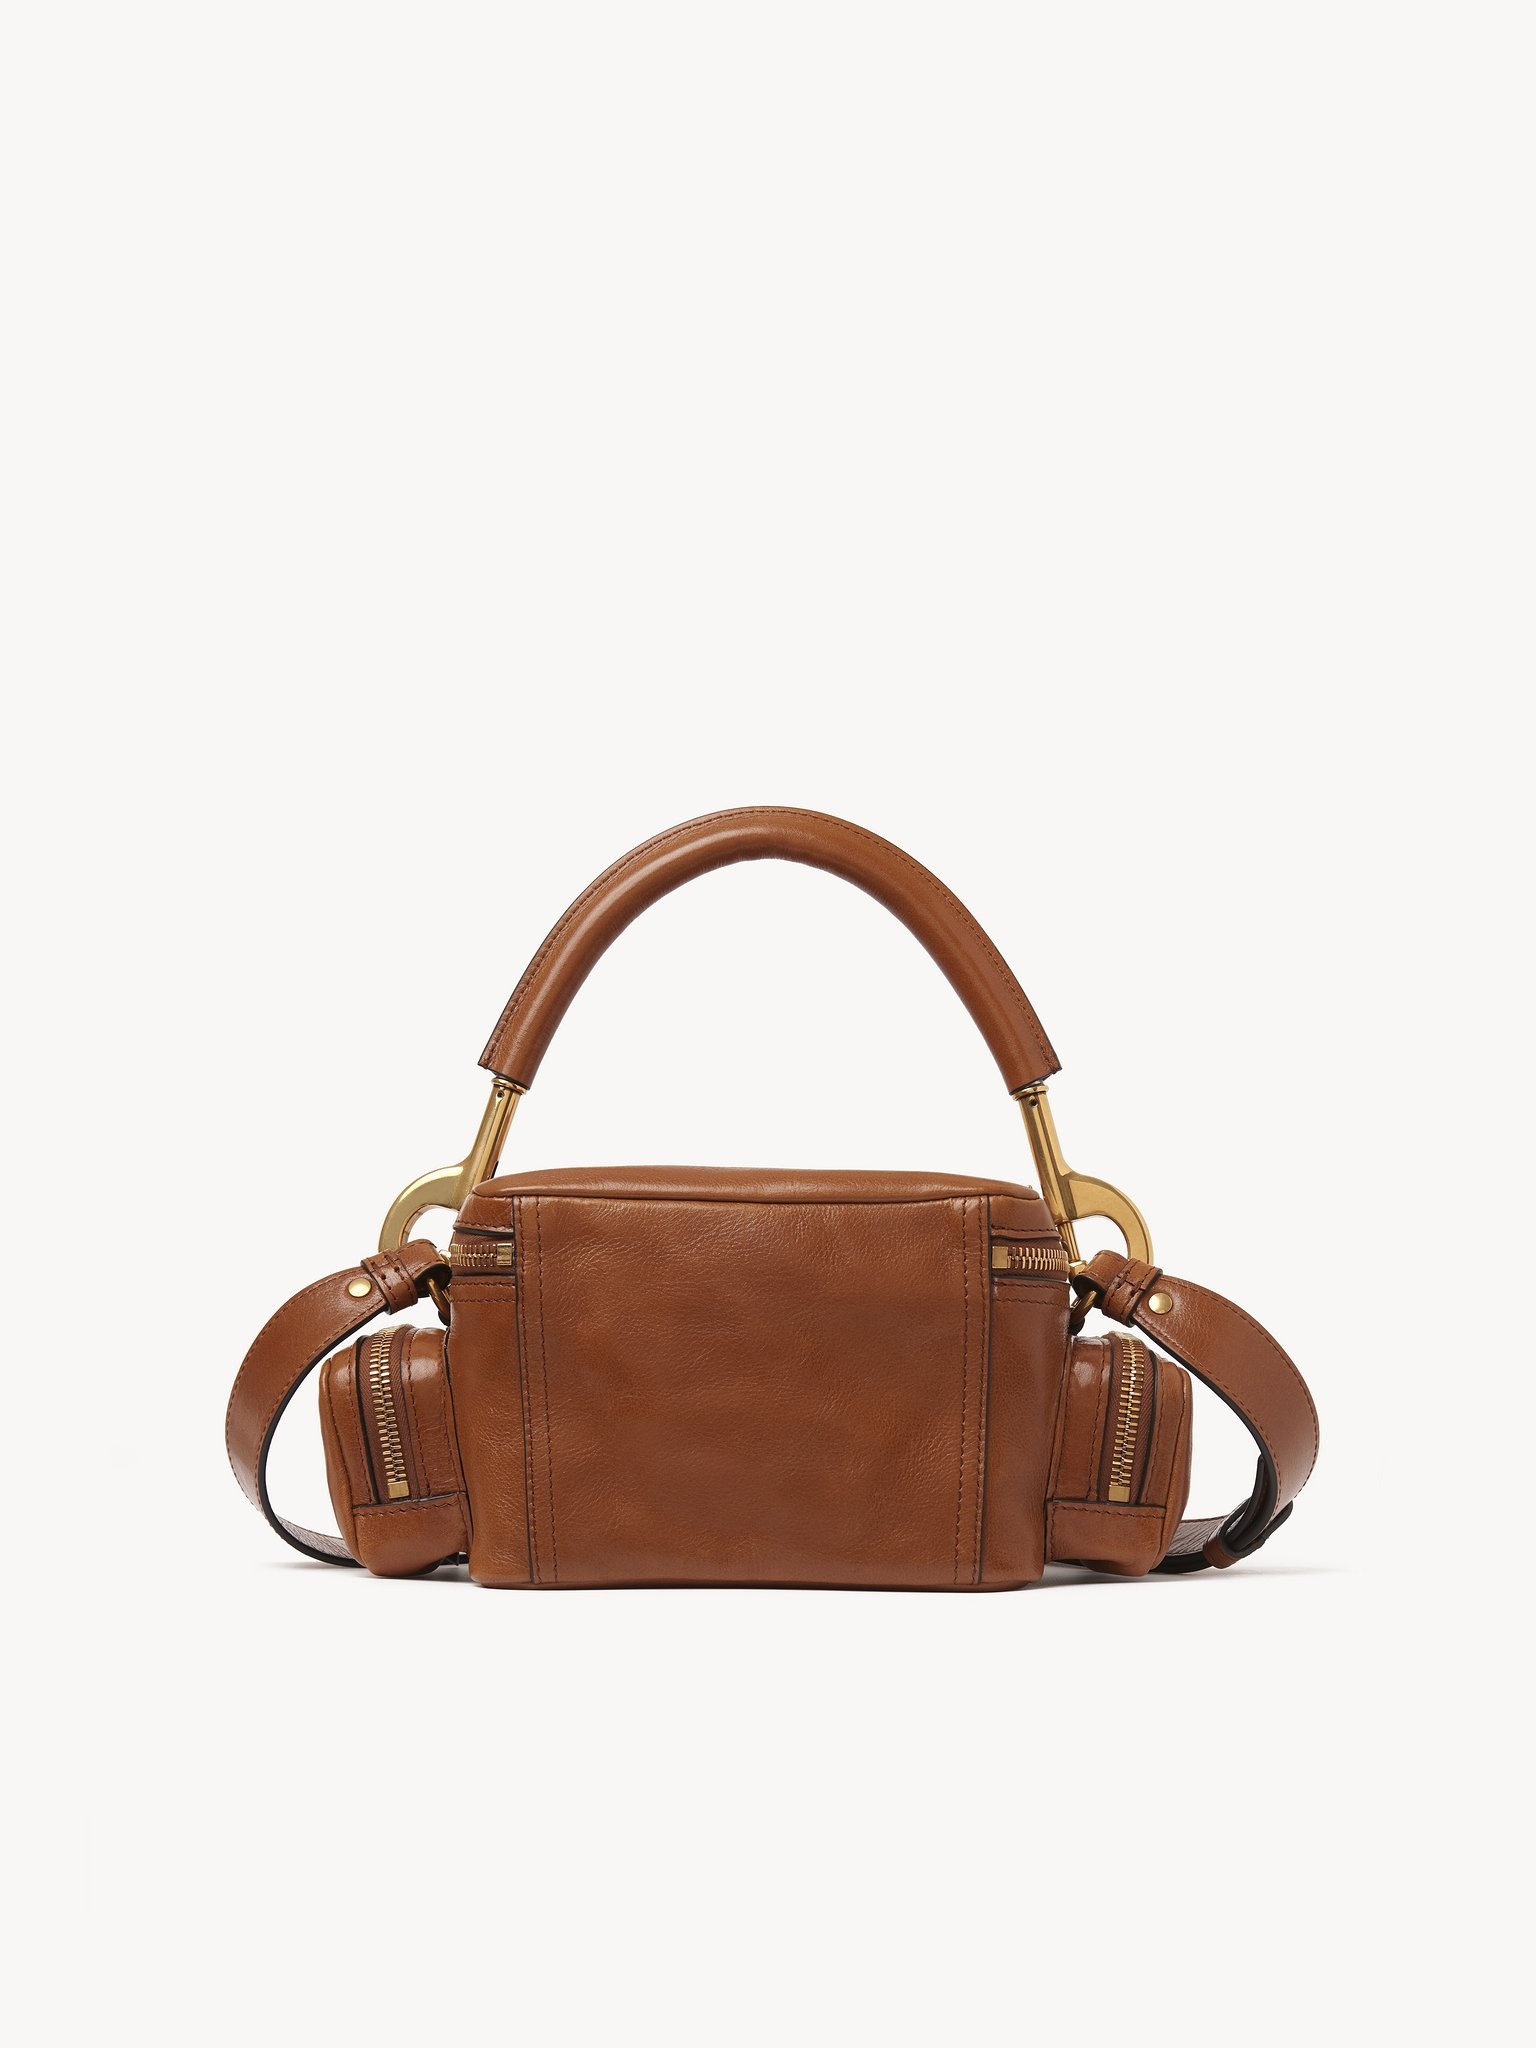 SMALL CAMERA BAG IN SOFT LEATHER - 4